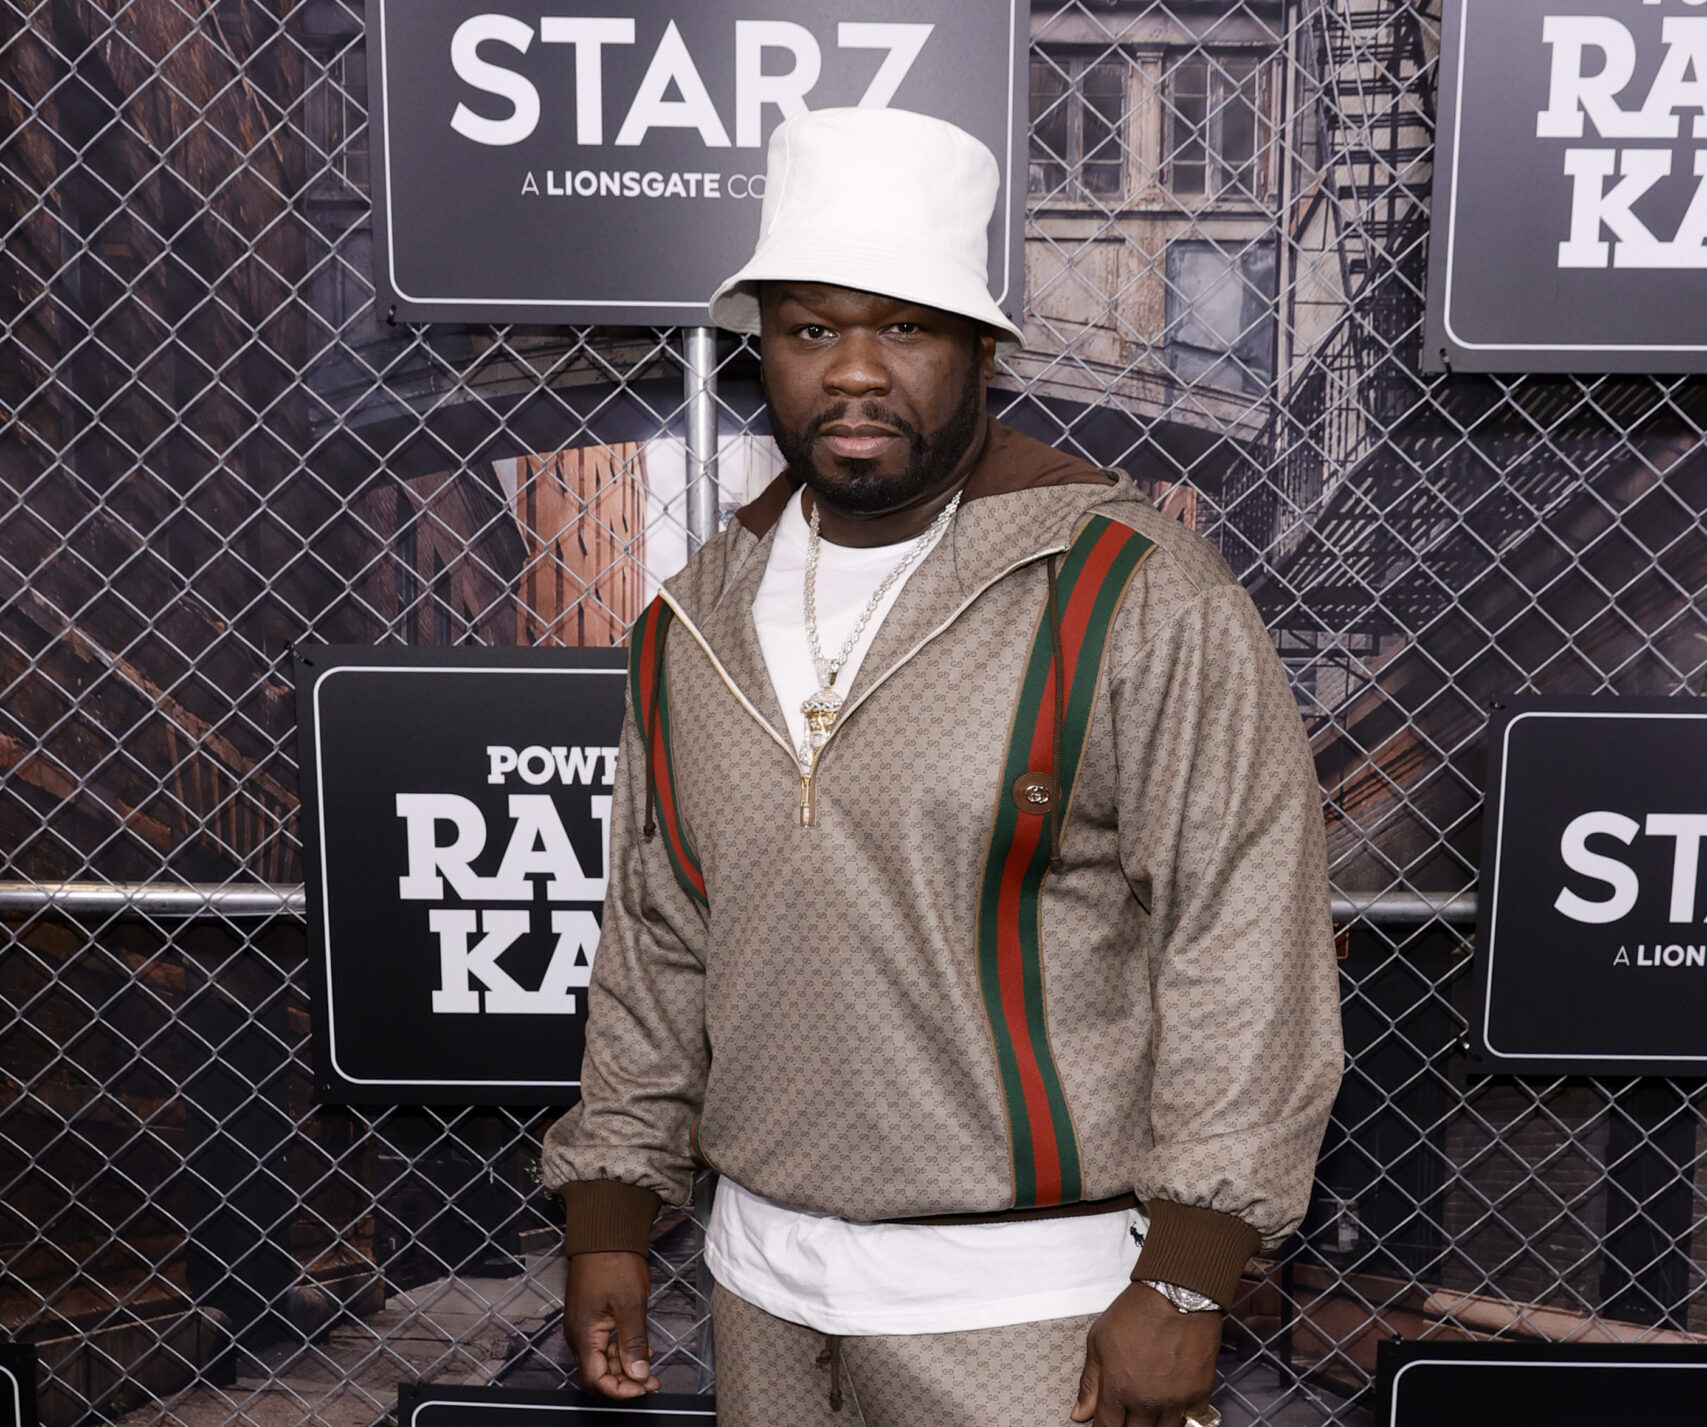 'FiF Looking Like 2003': 50 Cent's Video Leads Fans to Bring Up His ...